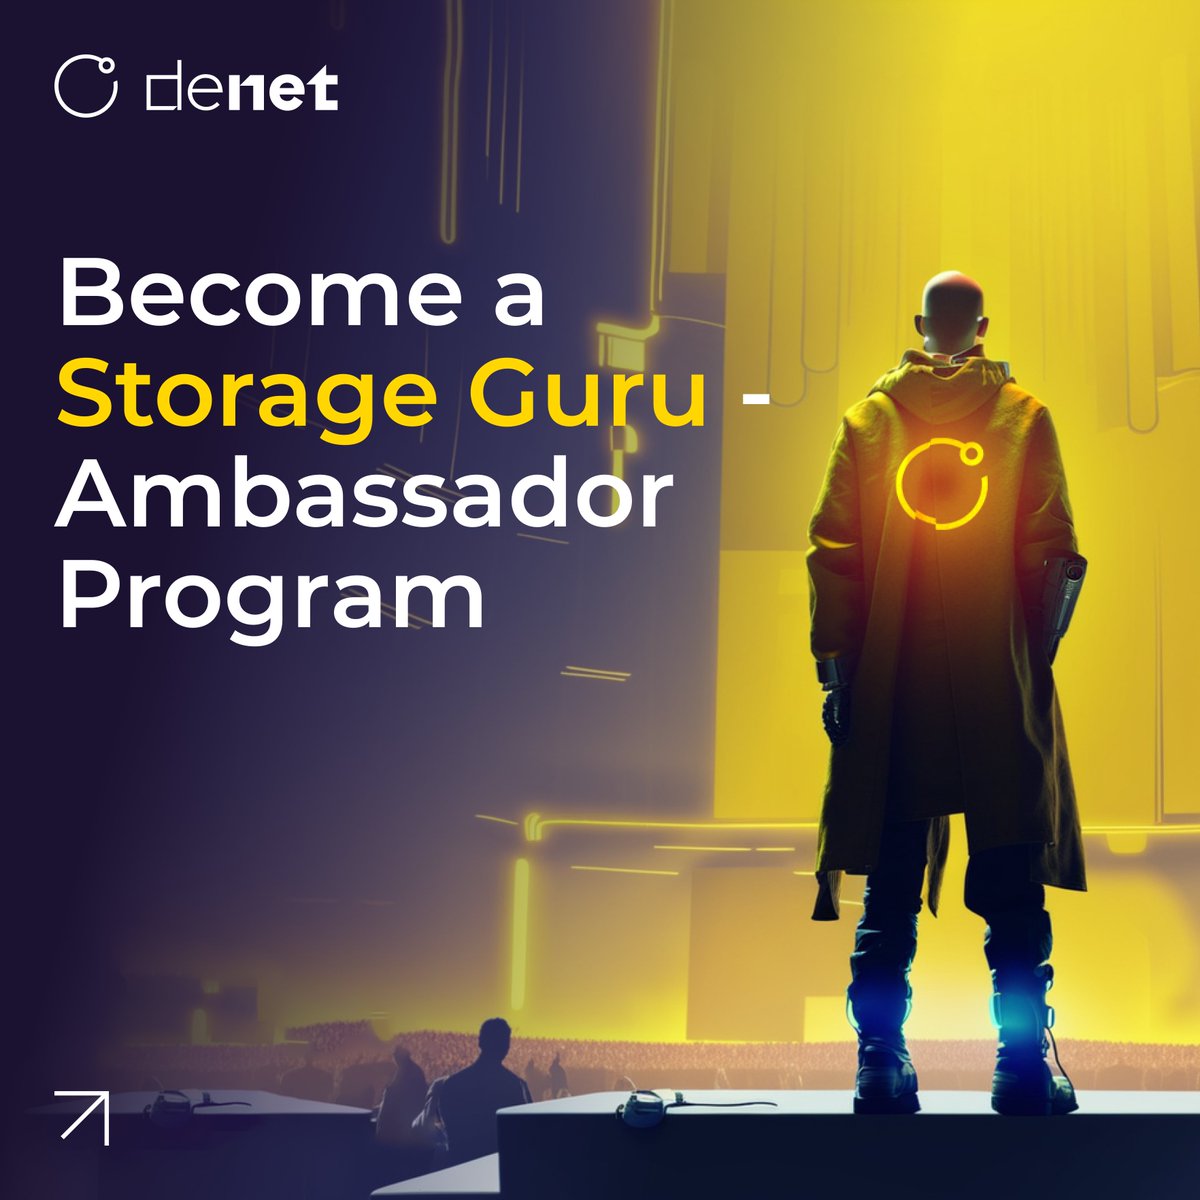 Become a Storage Guru: DeNet Launches Ambassador Program! Something big is on the horizon for decentralized storage. DeNet now seeking ambassadors, who will gain insider info even before the official release! Join Storage Guru Alliance and get rewarded > forms.gle/h8ZdFMNJkgrroX…